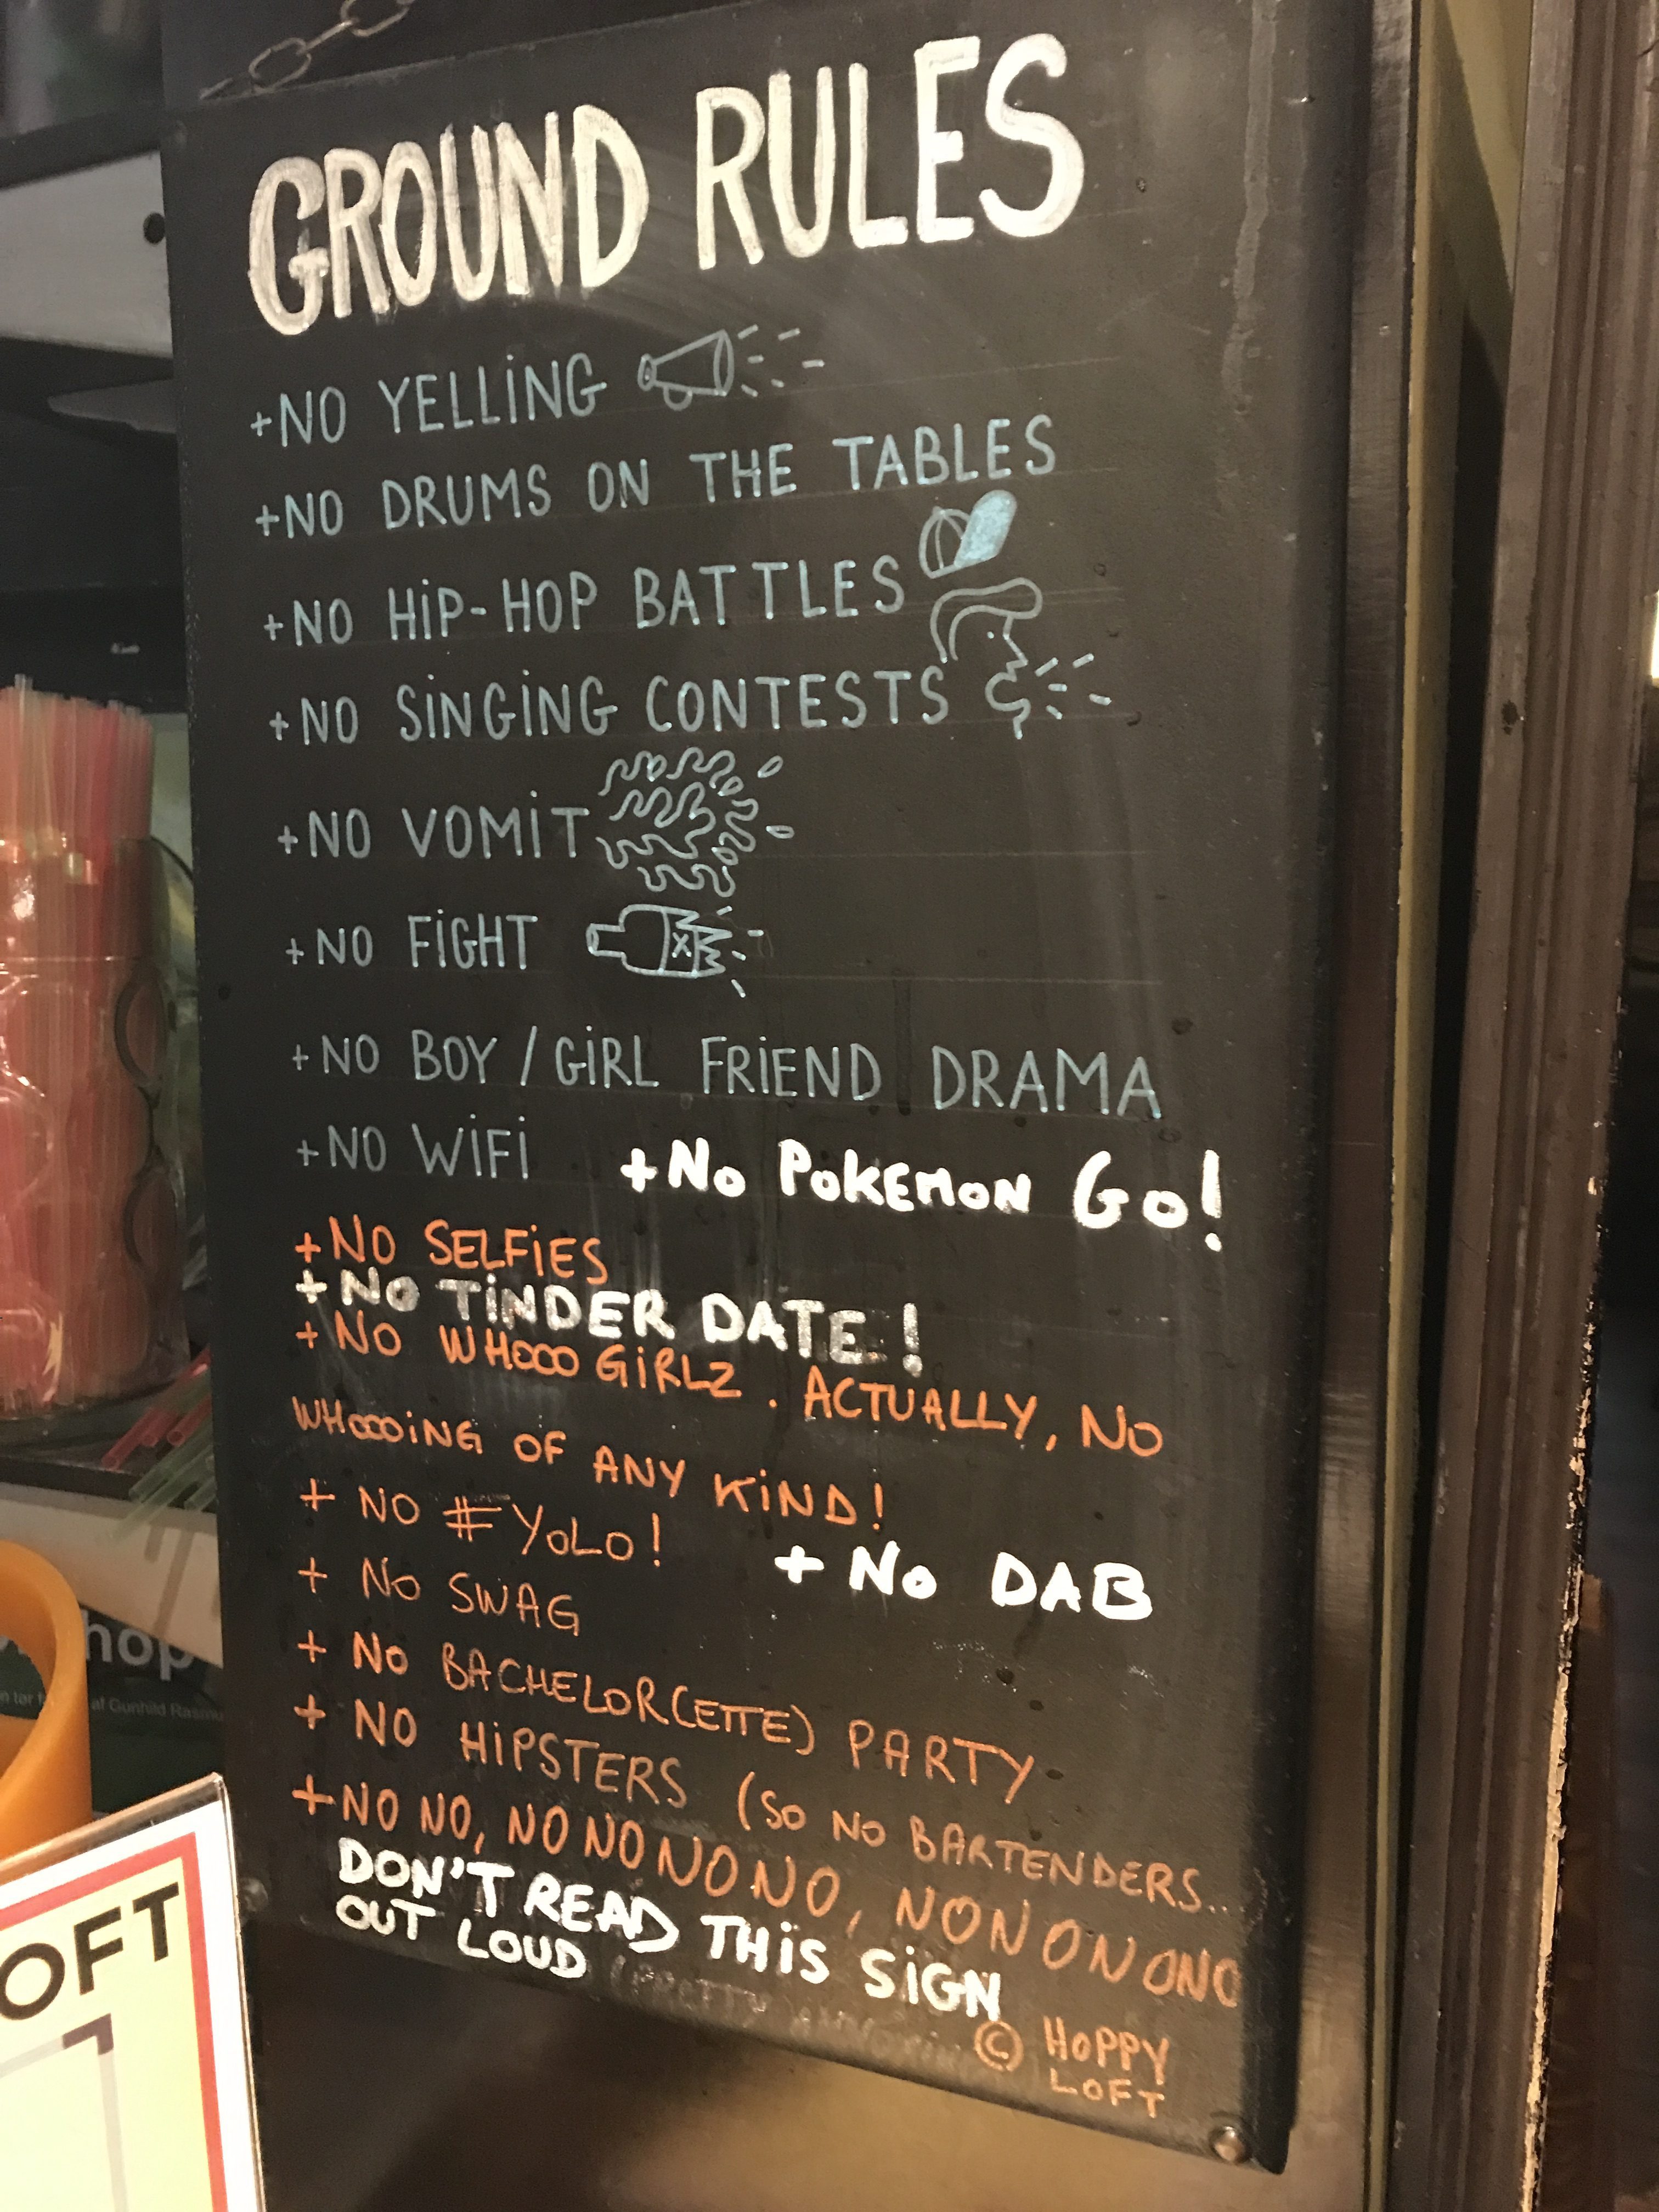 'Ground Rules' sign at the Delirium Cafe in Brussels, Belgium.